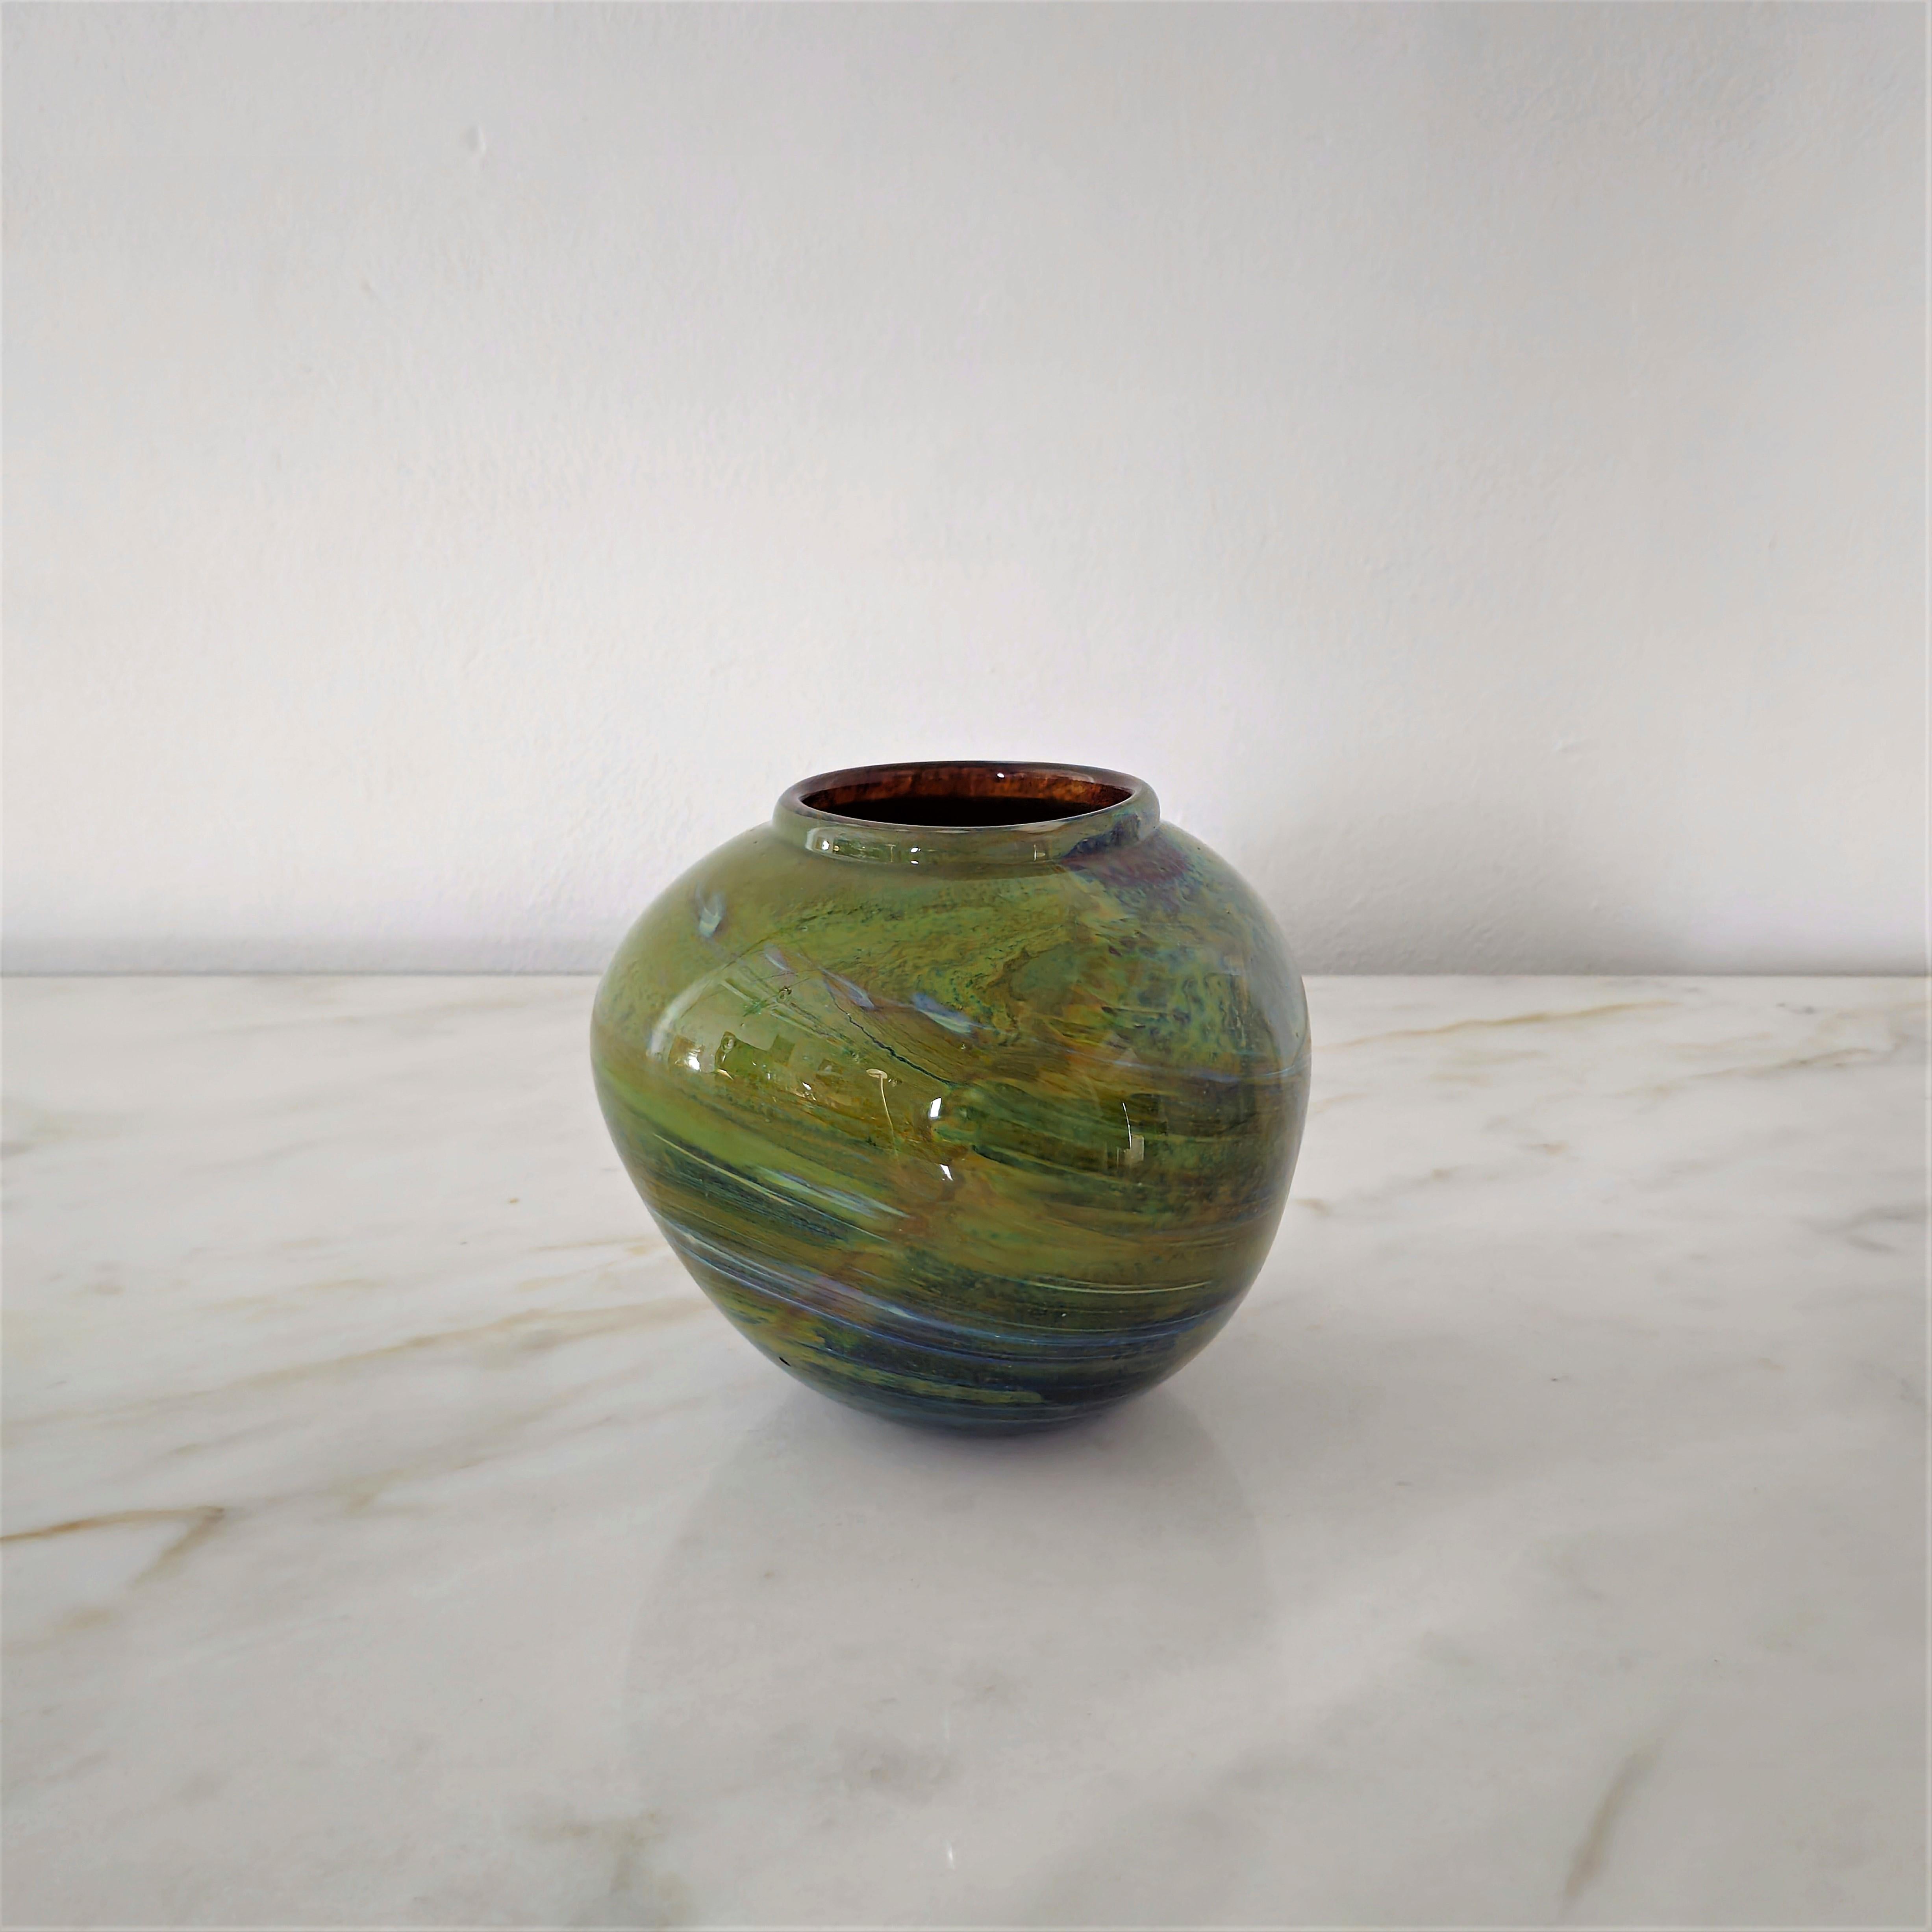 Vase Decorative Object Barovier & Toso Murano Glass Midcentury Italy 1960s For Sale 1